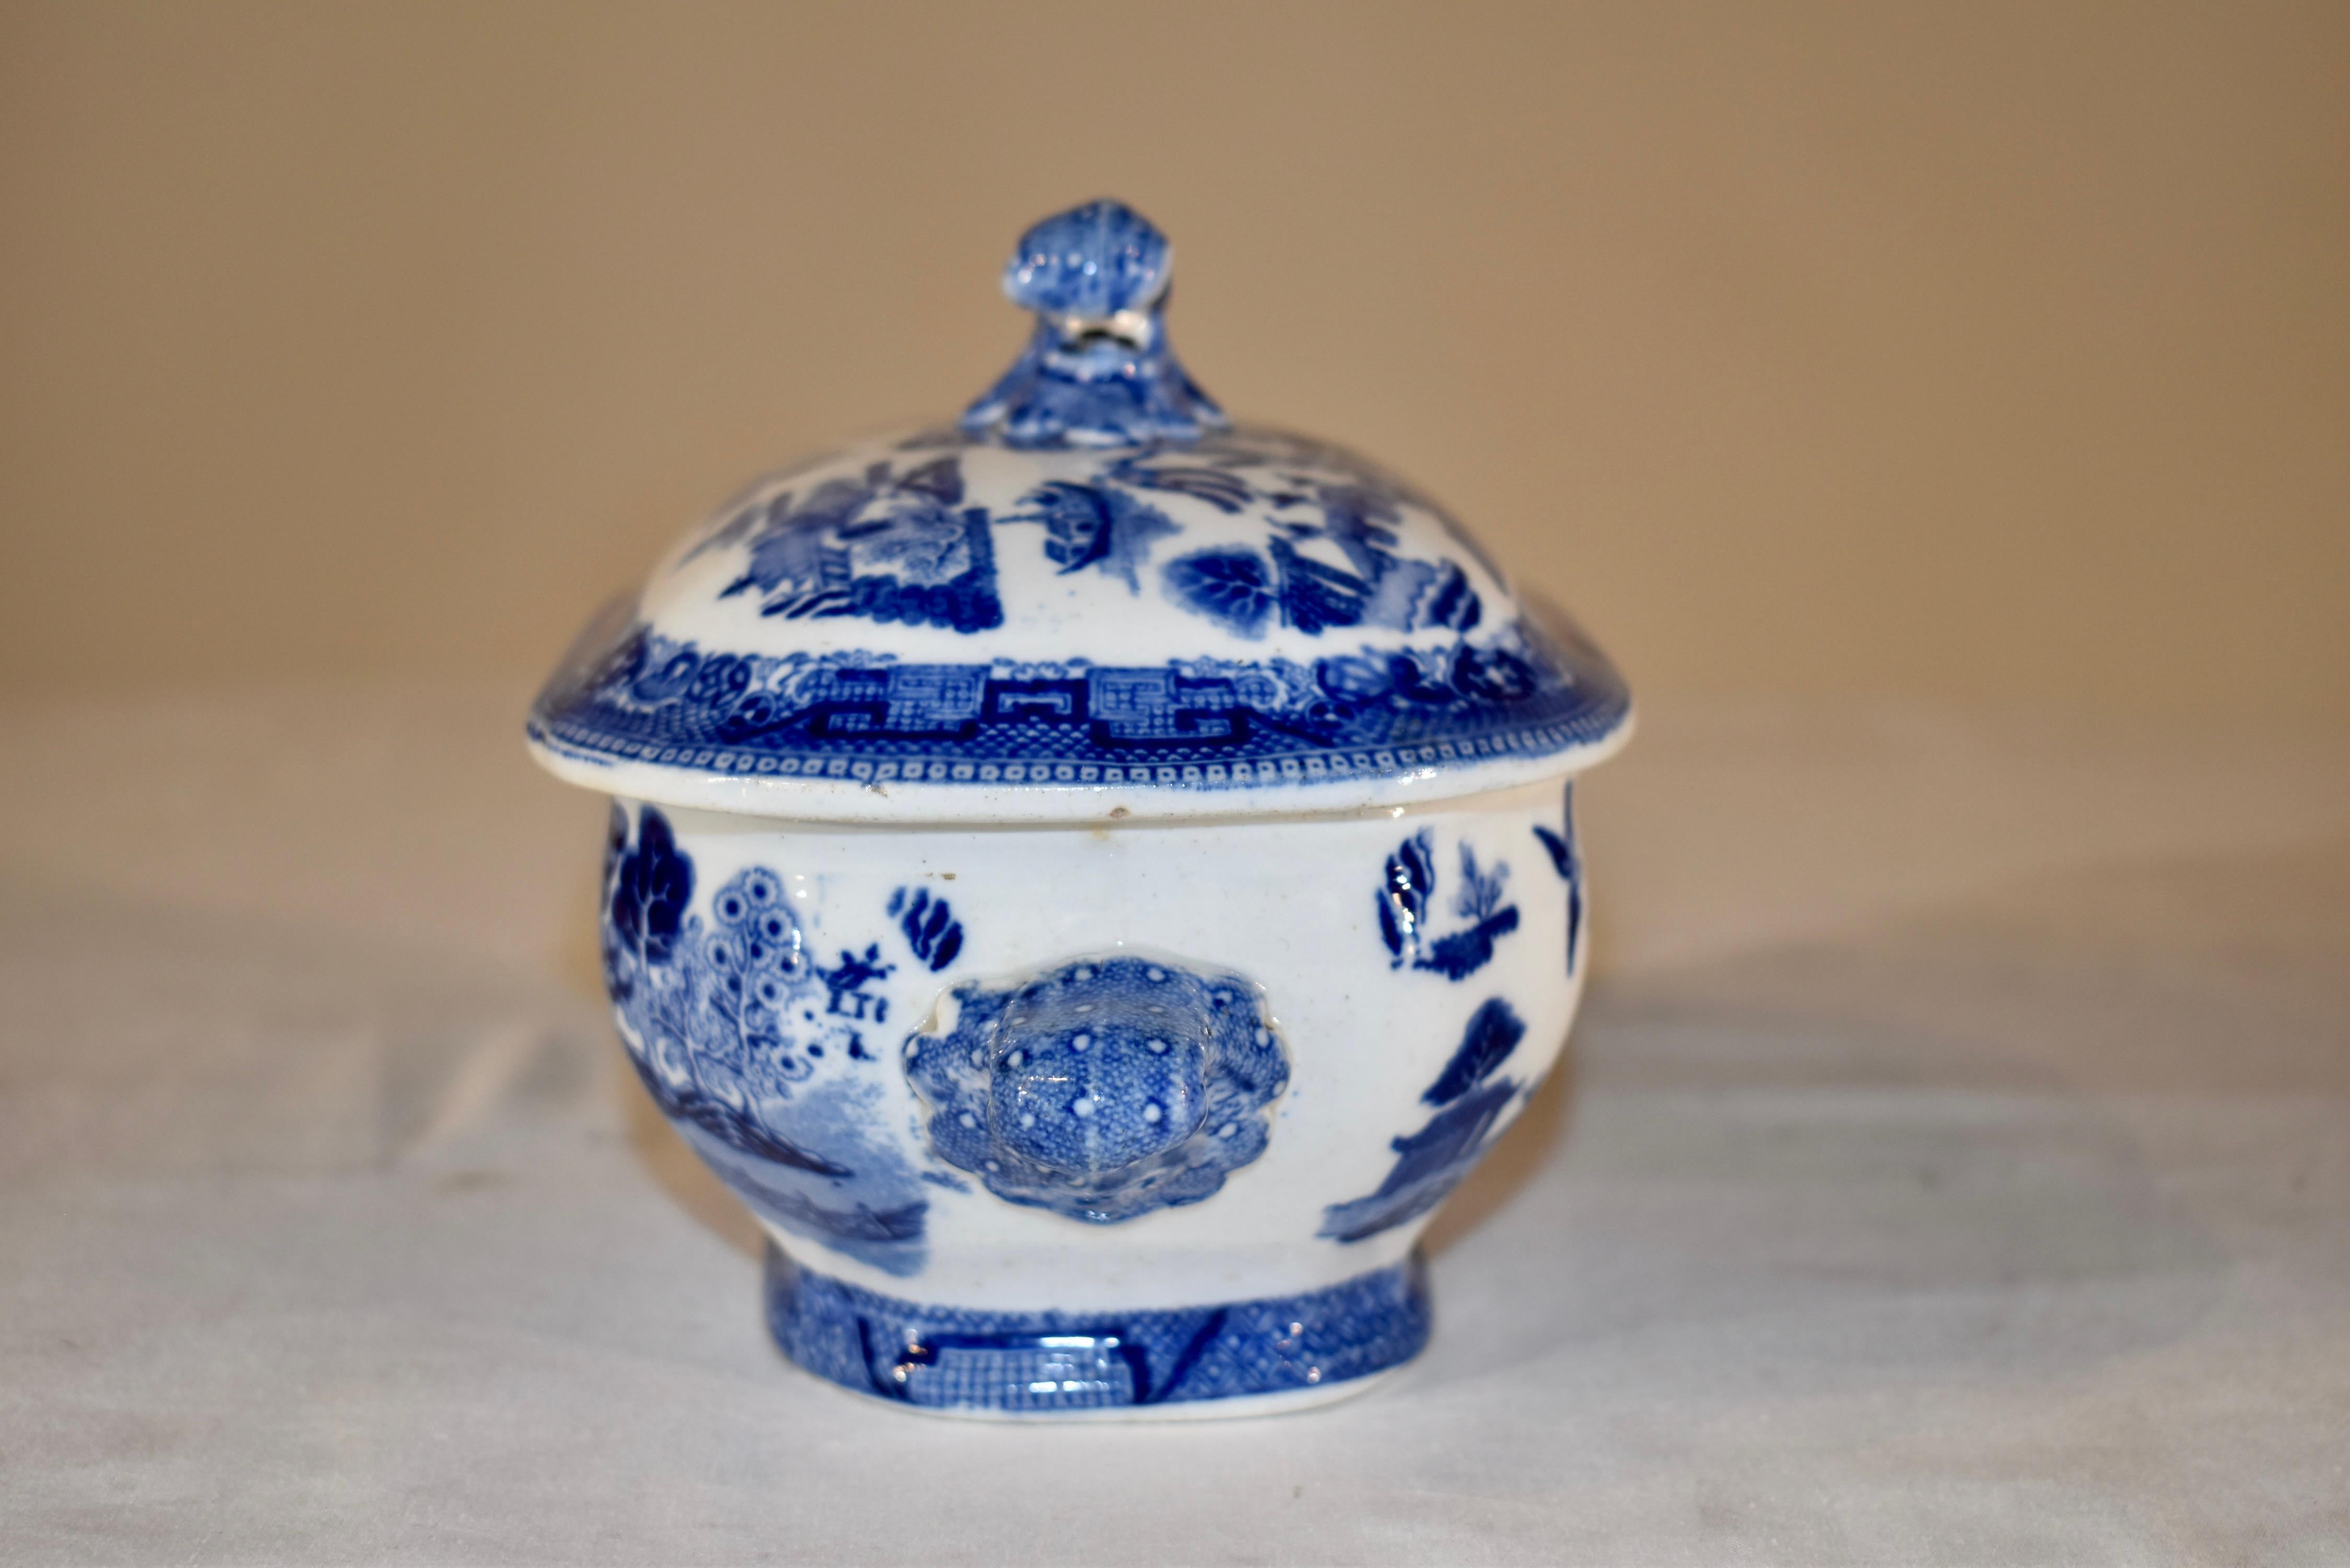 Ceramic 19th Century Blue Willow Sauce Tureen and Ladle For Sale